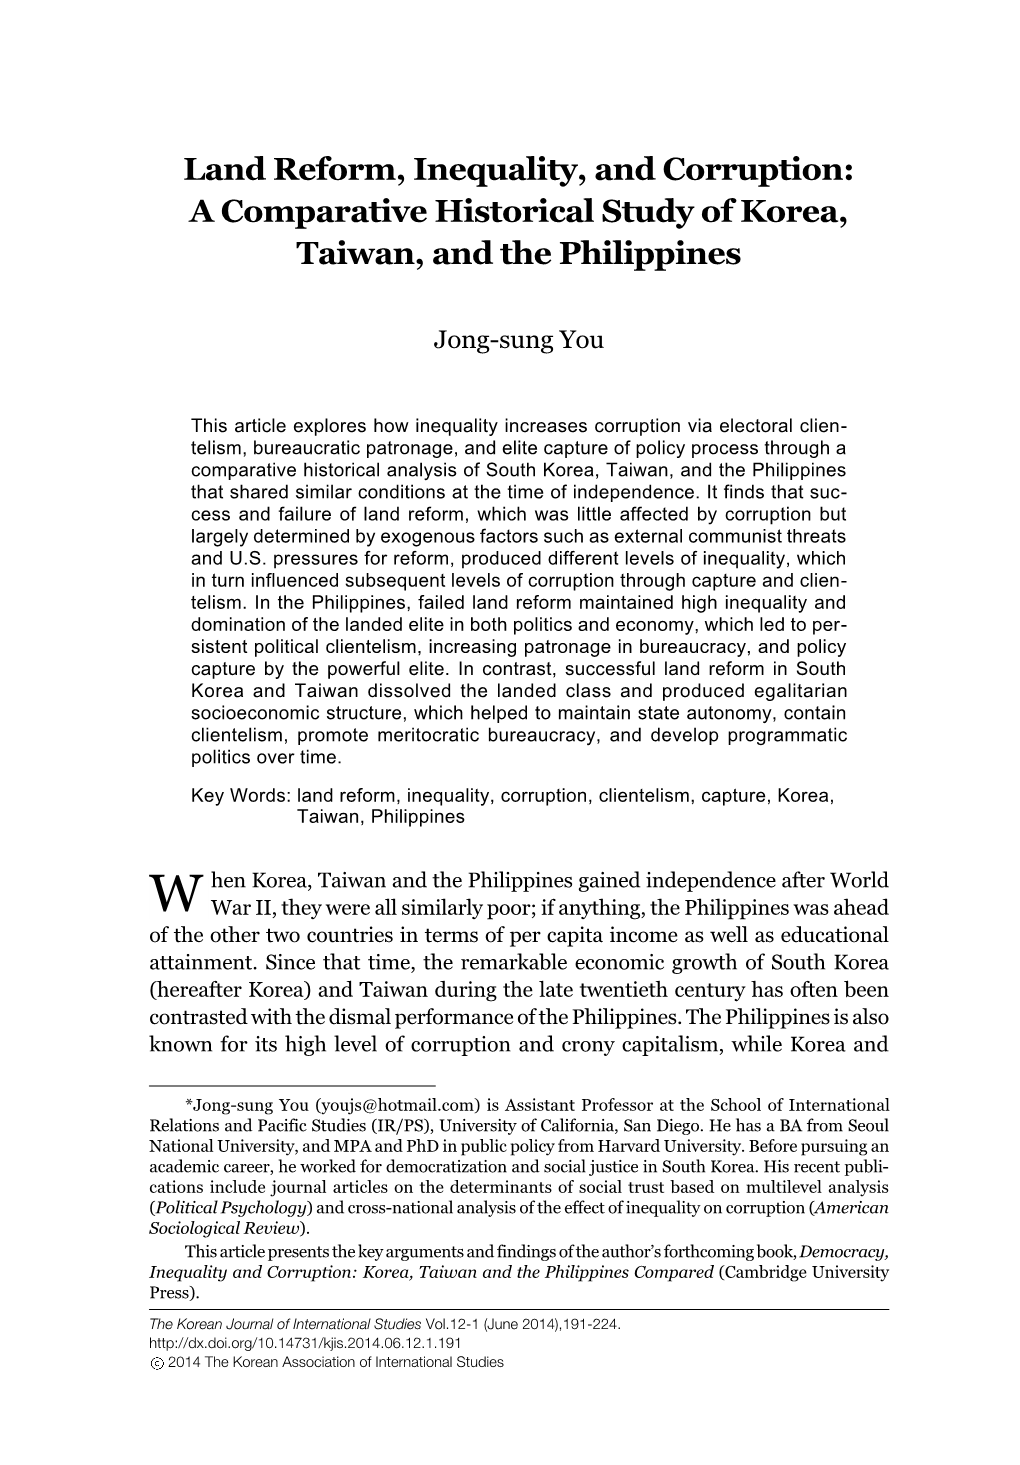 Land Reform, Inequality, and Corruption: a Comparative Historical Study of Korea, Taiwan, and the Philippines